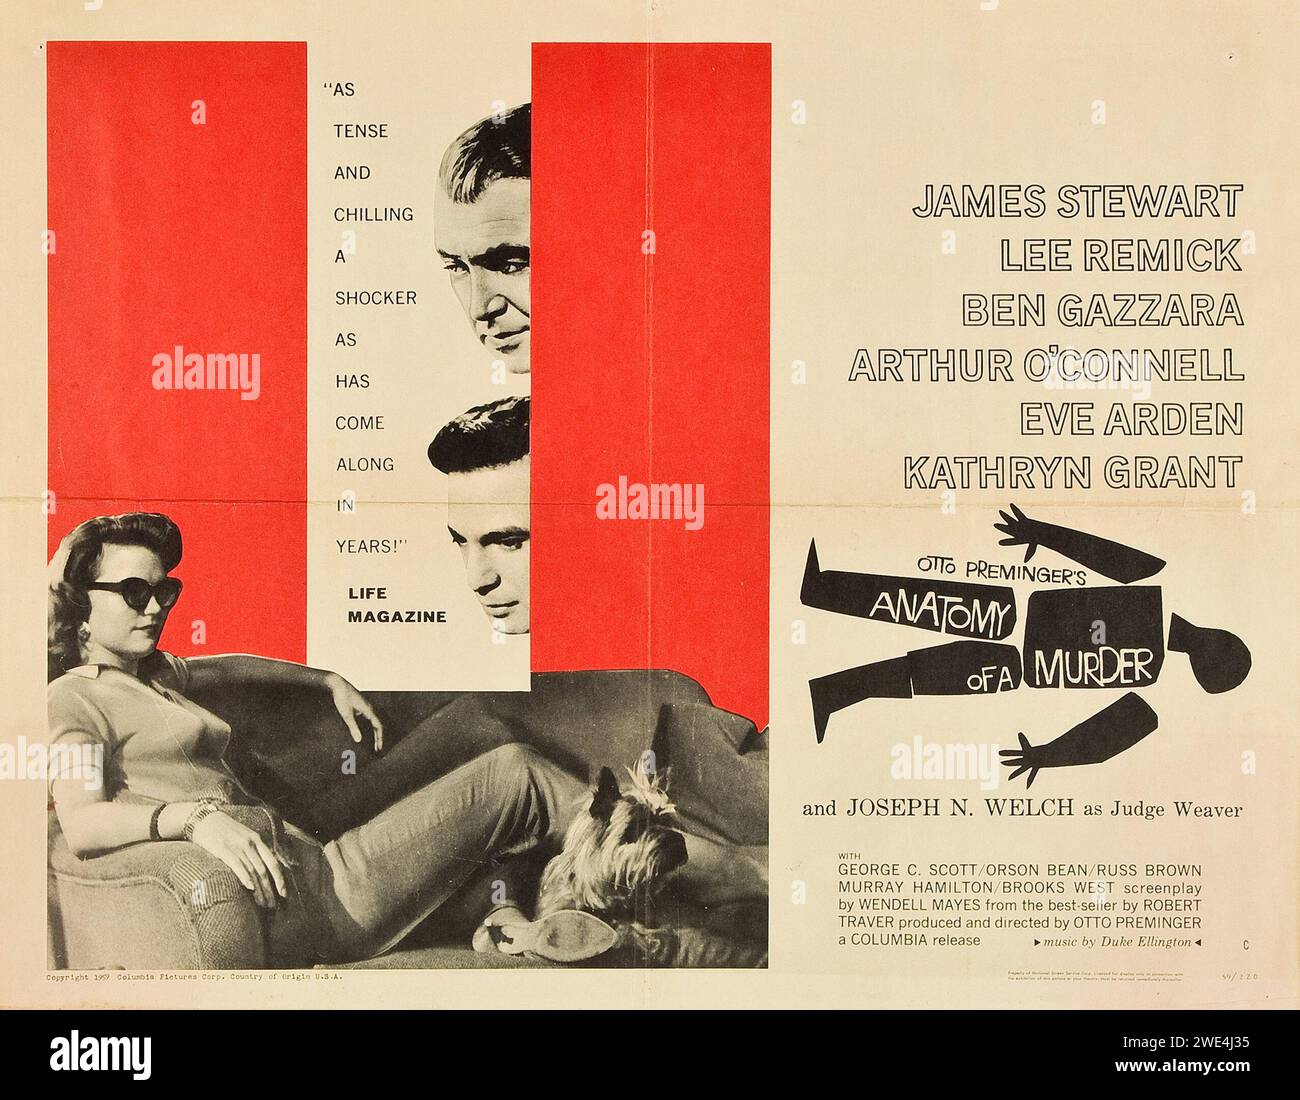 Anatomy of a Murder (Columbia, 1959) poster di film d'epoca - Alfred Hitchcock - James Stewart, Lee Remick - stile C. Foto Stock